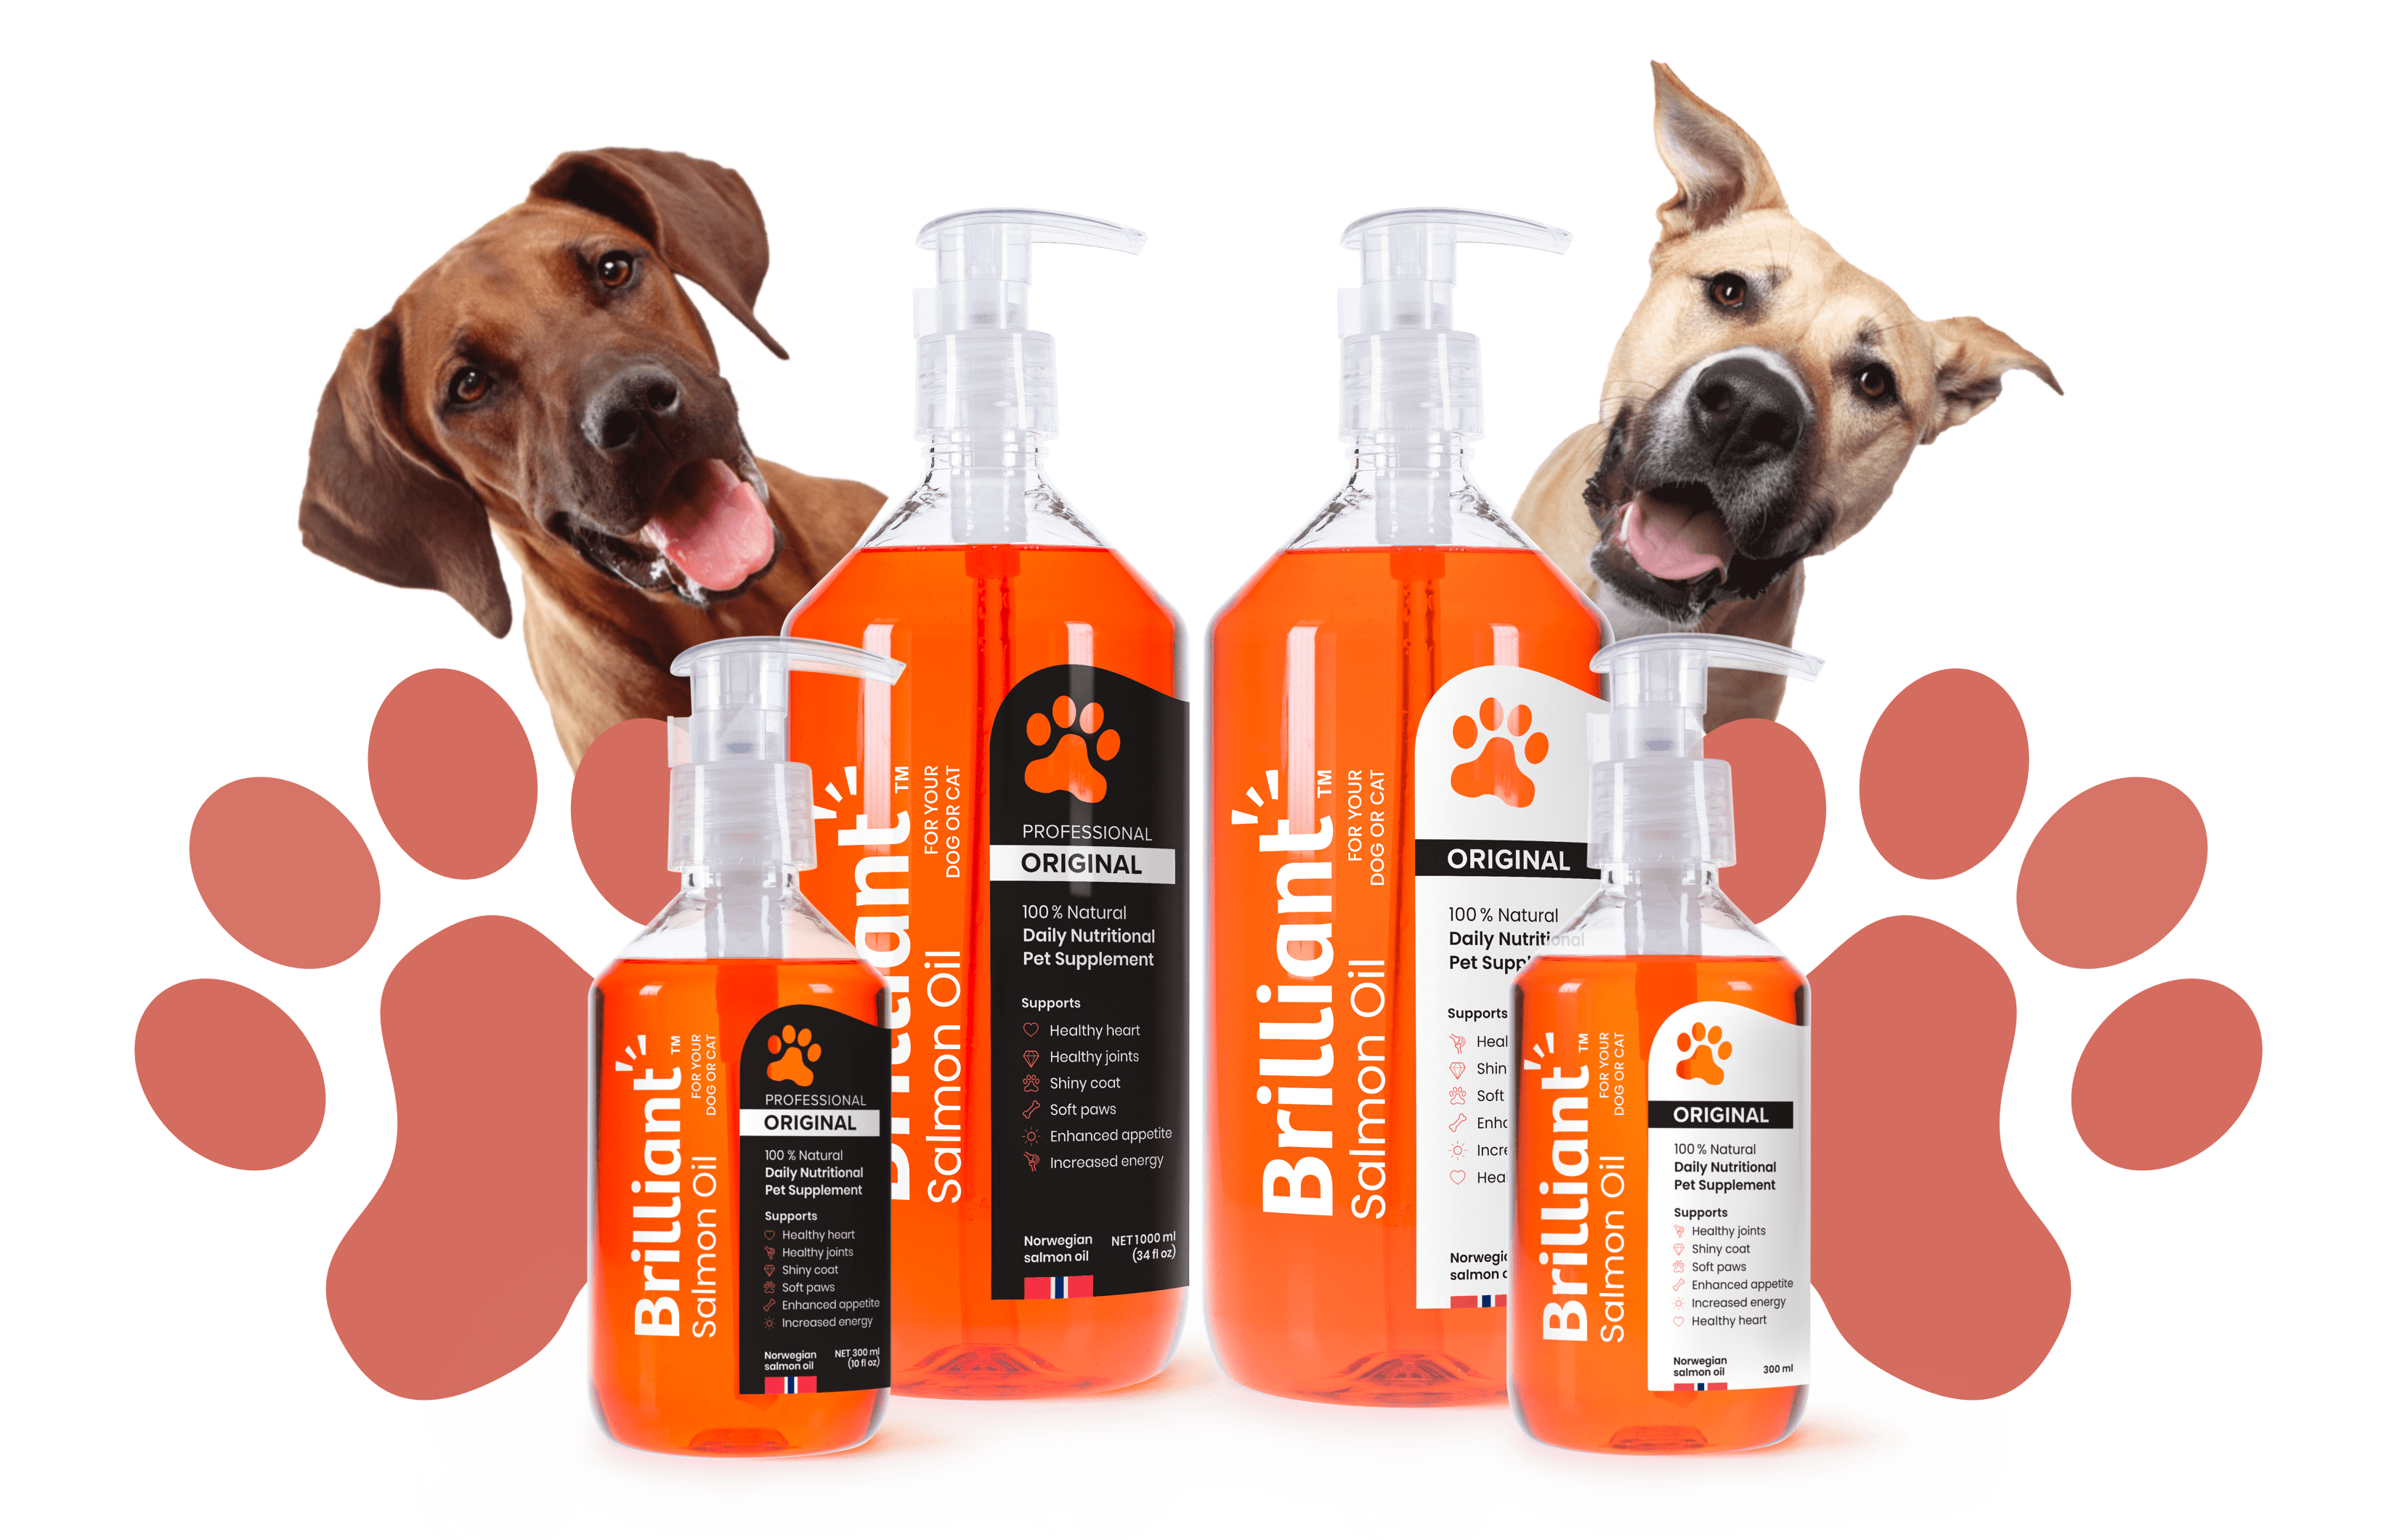 Where to Buy Salmon Oil for Dogs